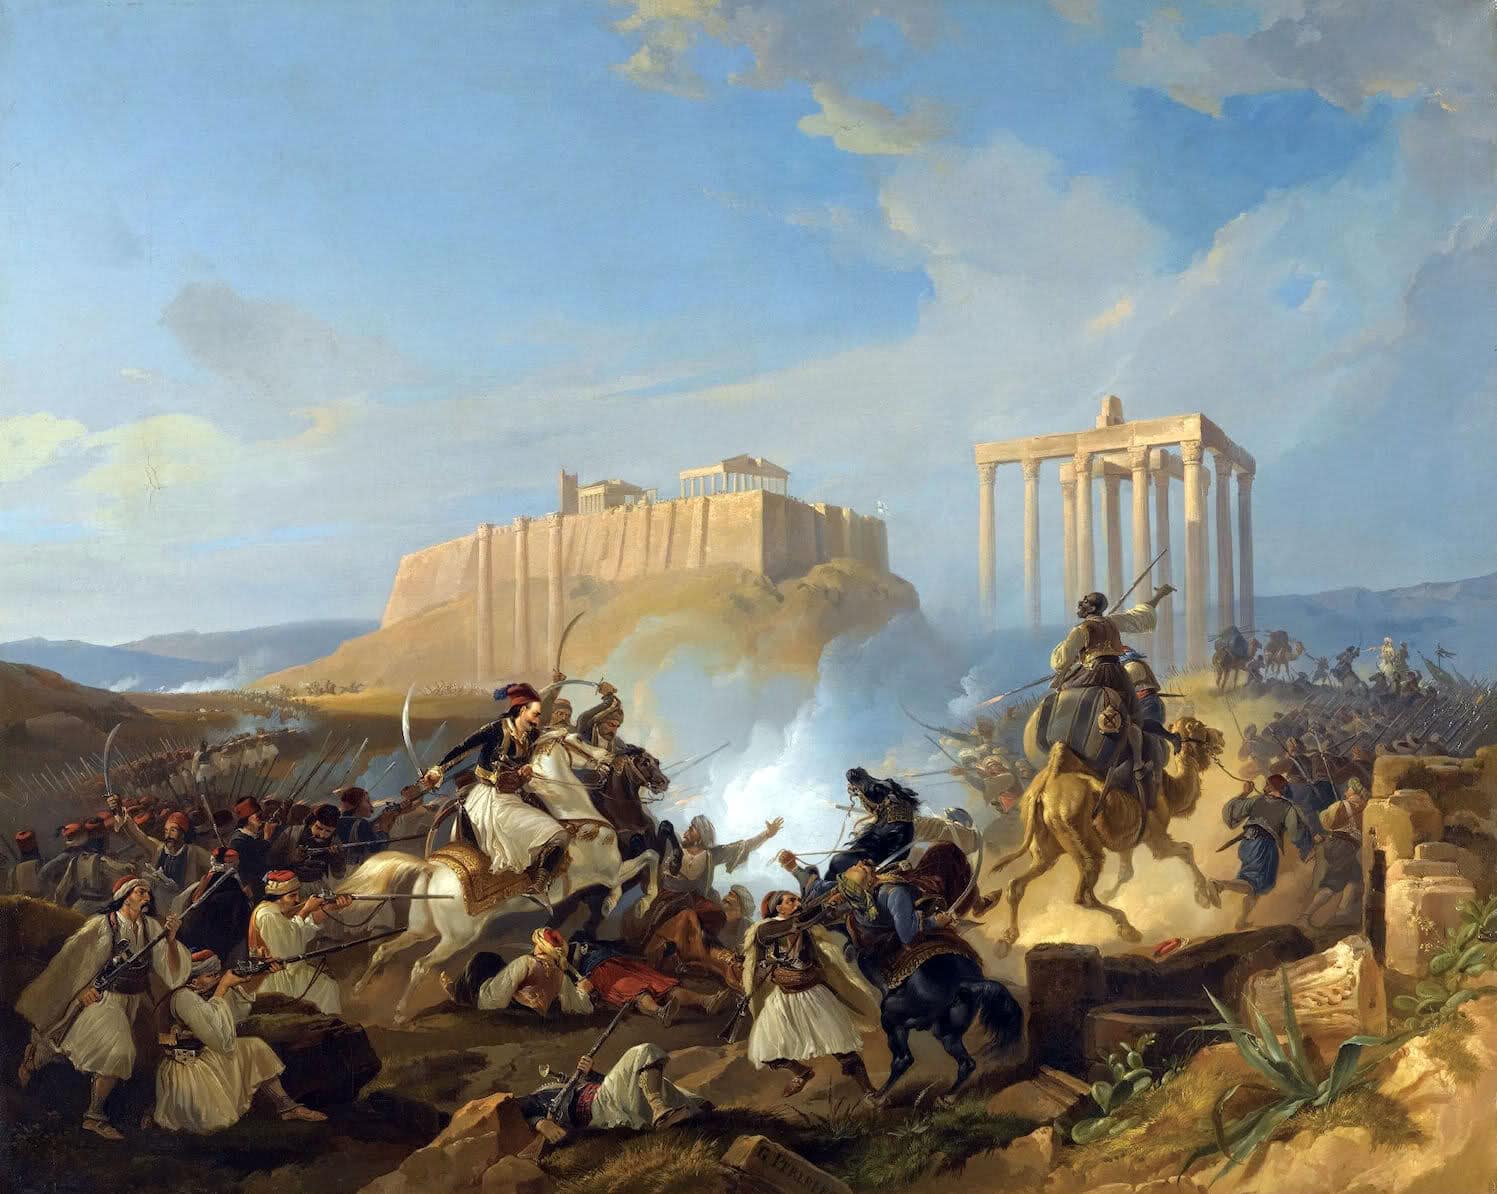 Ottoman Rule and the Greek War of Independence